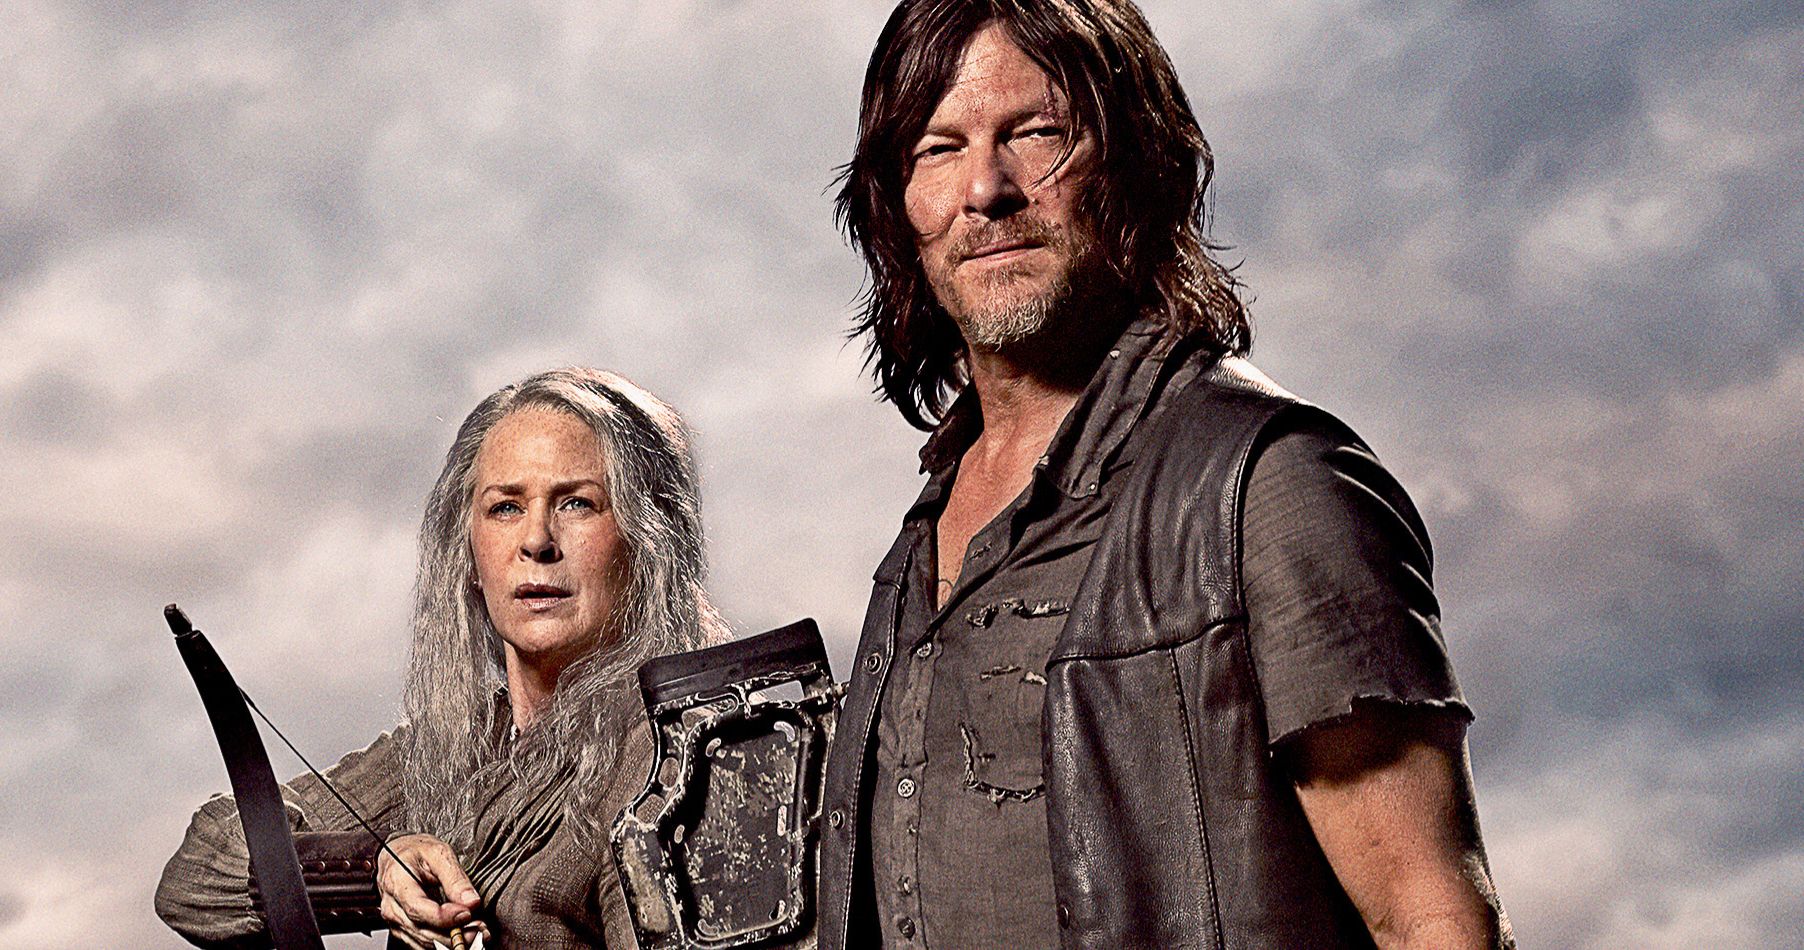 Daryl &amp; Carol Won't Look Anything Like The Walking Dead According to Norman Reedus